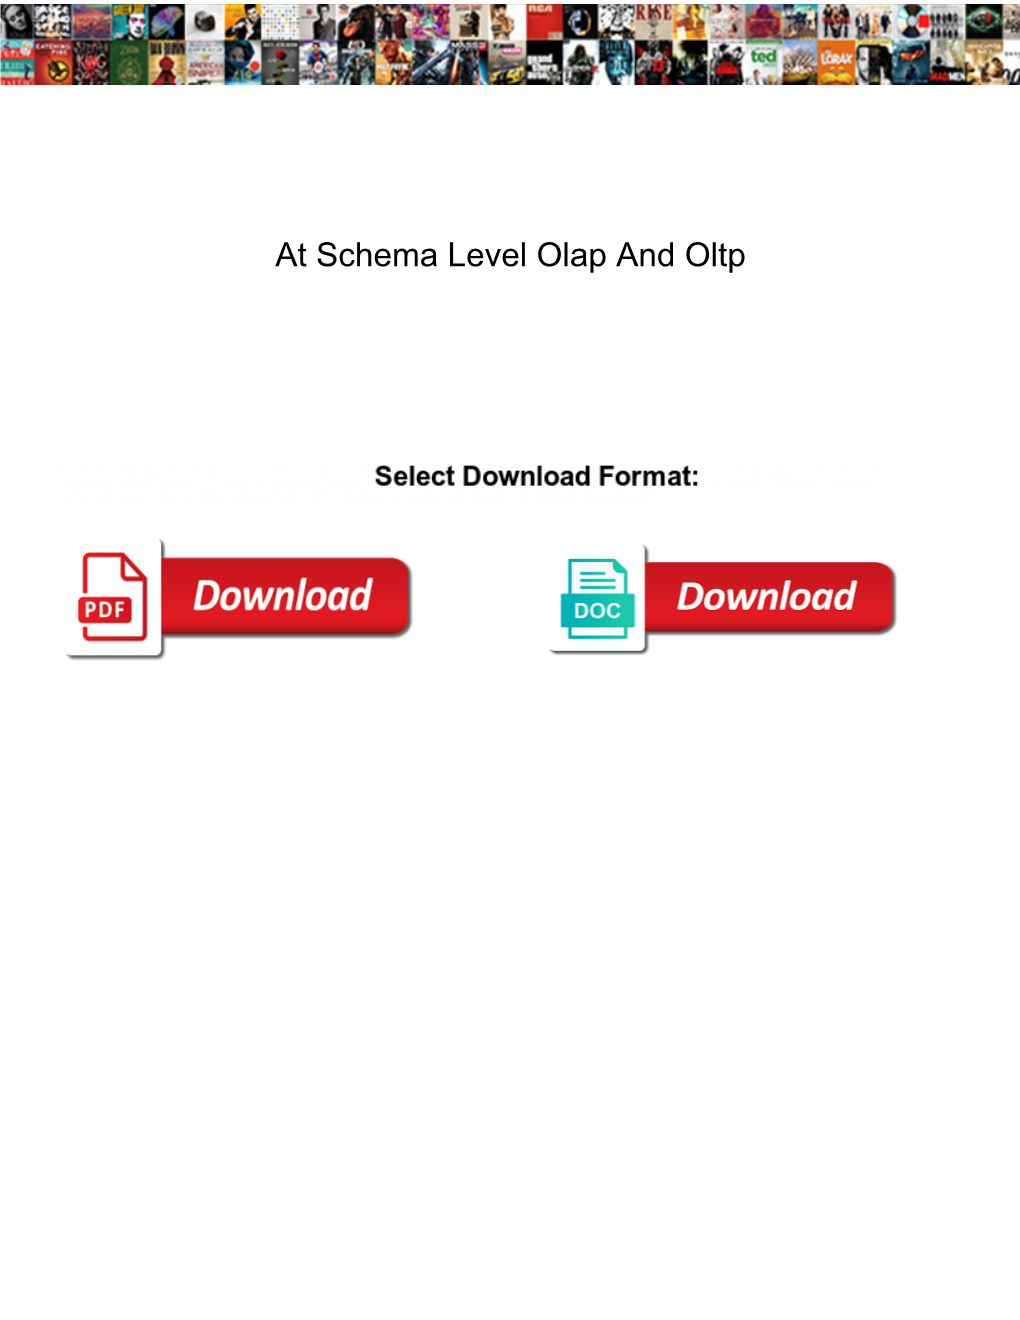 At Schema Level Olap and Oltp